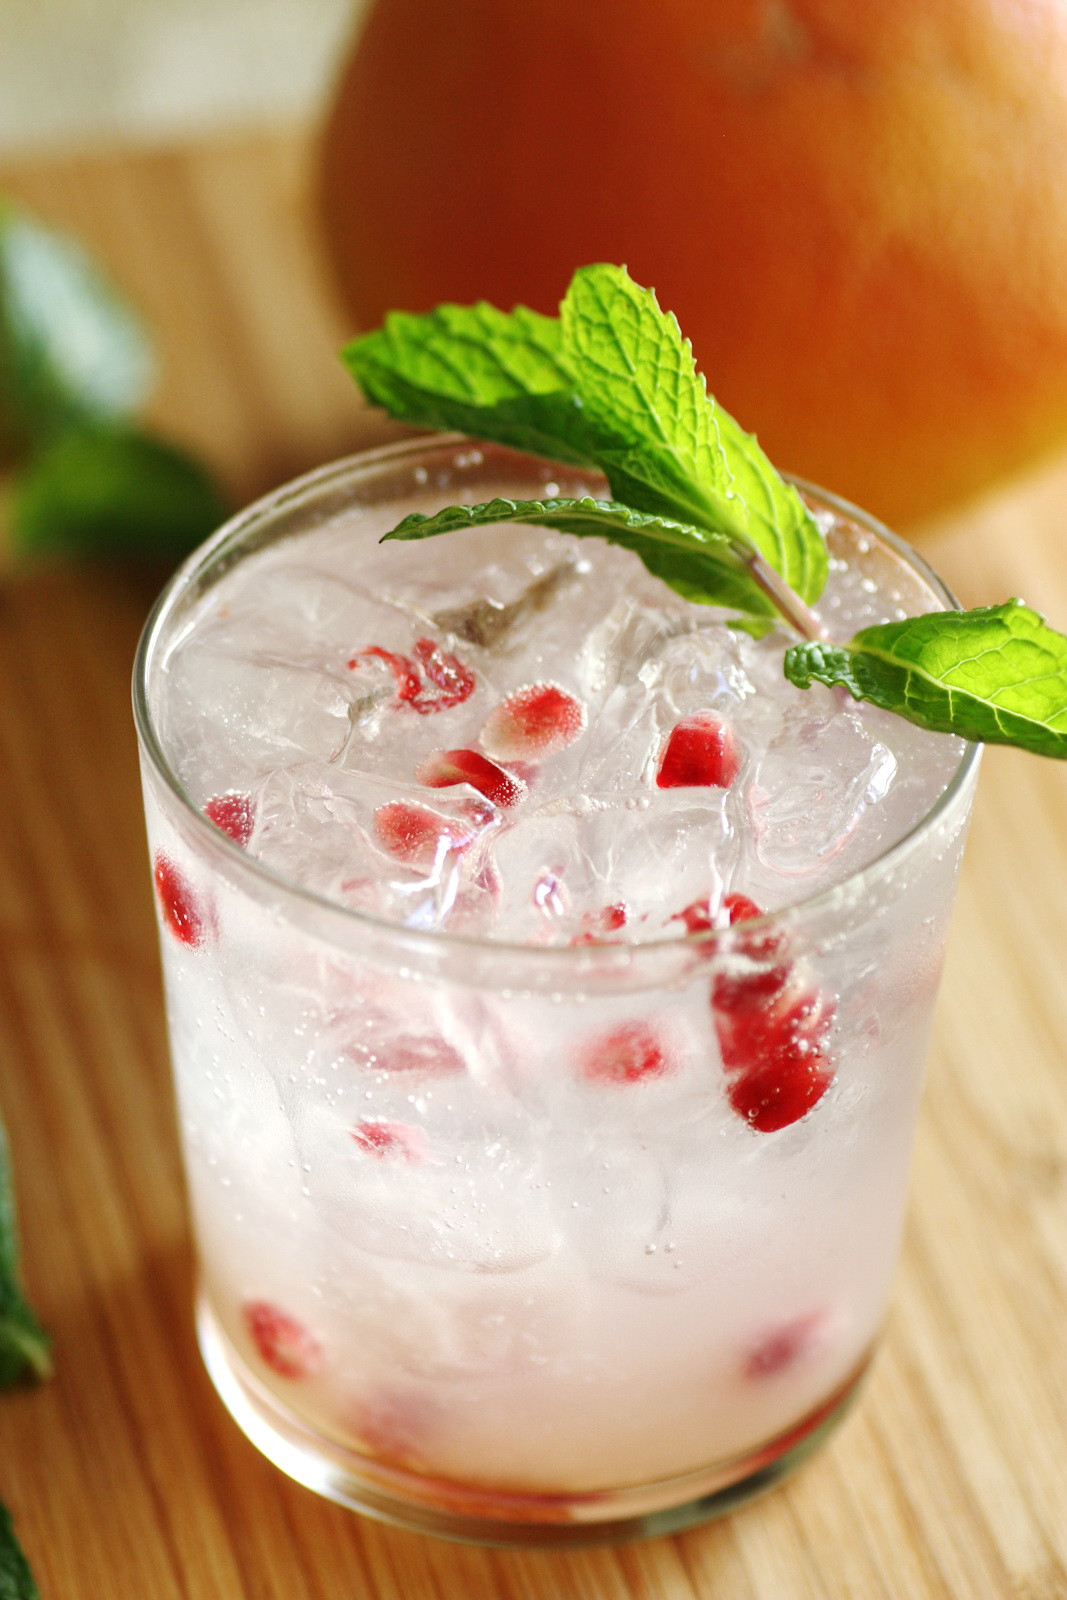 Holiday Cocktail Party Menu Ideas
 Pomegranate Christmas Cocktail – Alcoholic Holiday Party